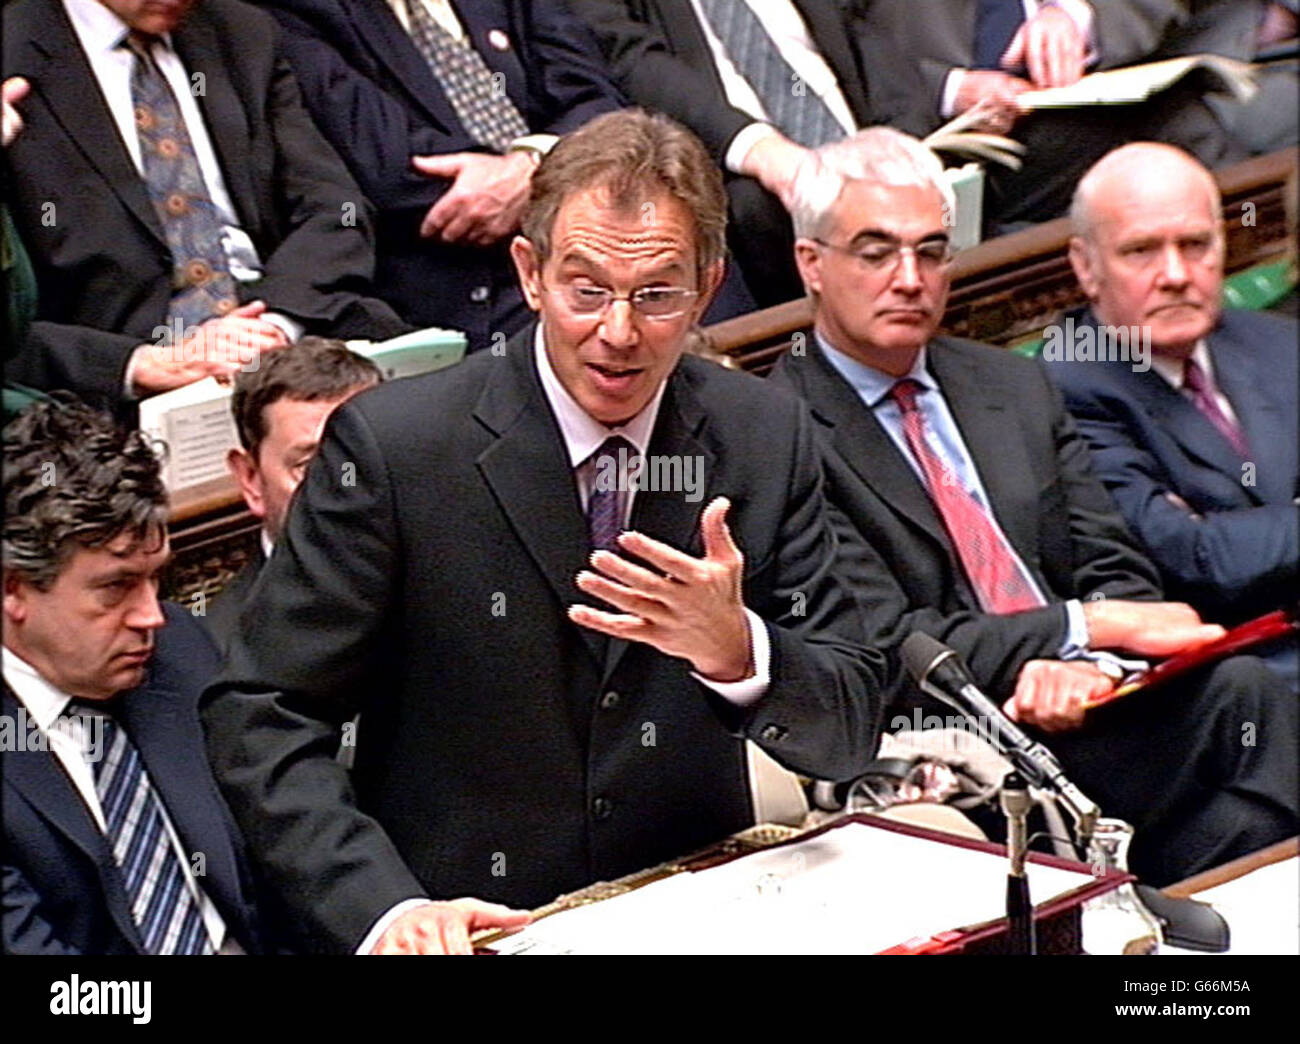 BLAIR - PM QUESTIONS Stock Photo